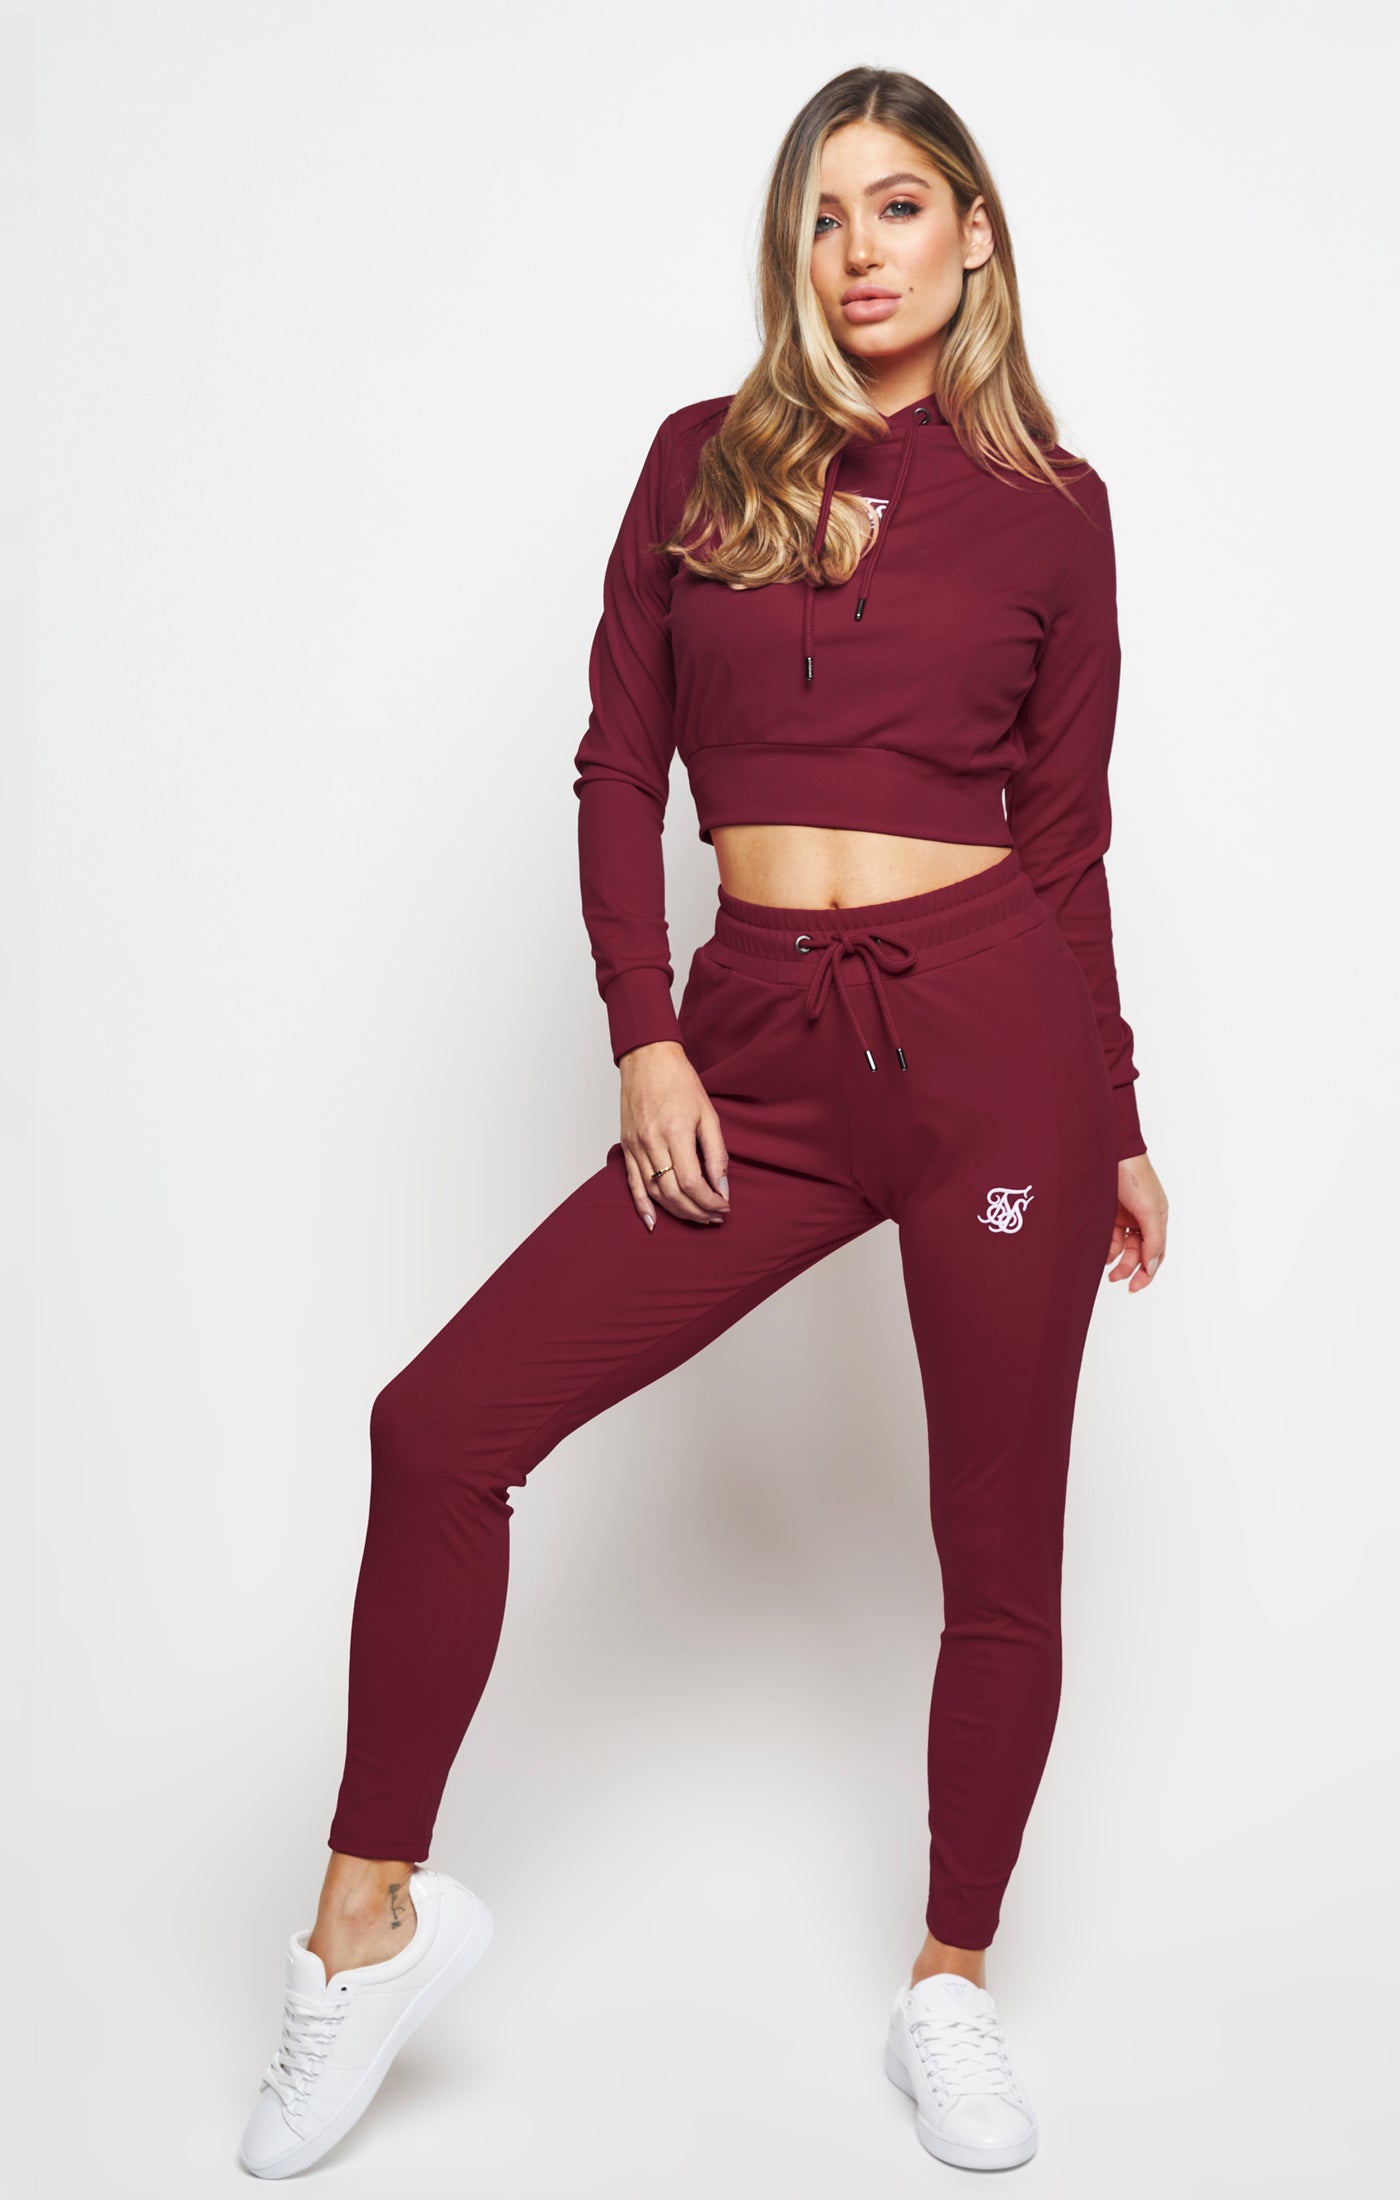 Load image into Gallery viewer, SikSilk Zonal Track Top - Burgundy (3)